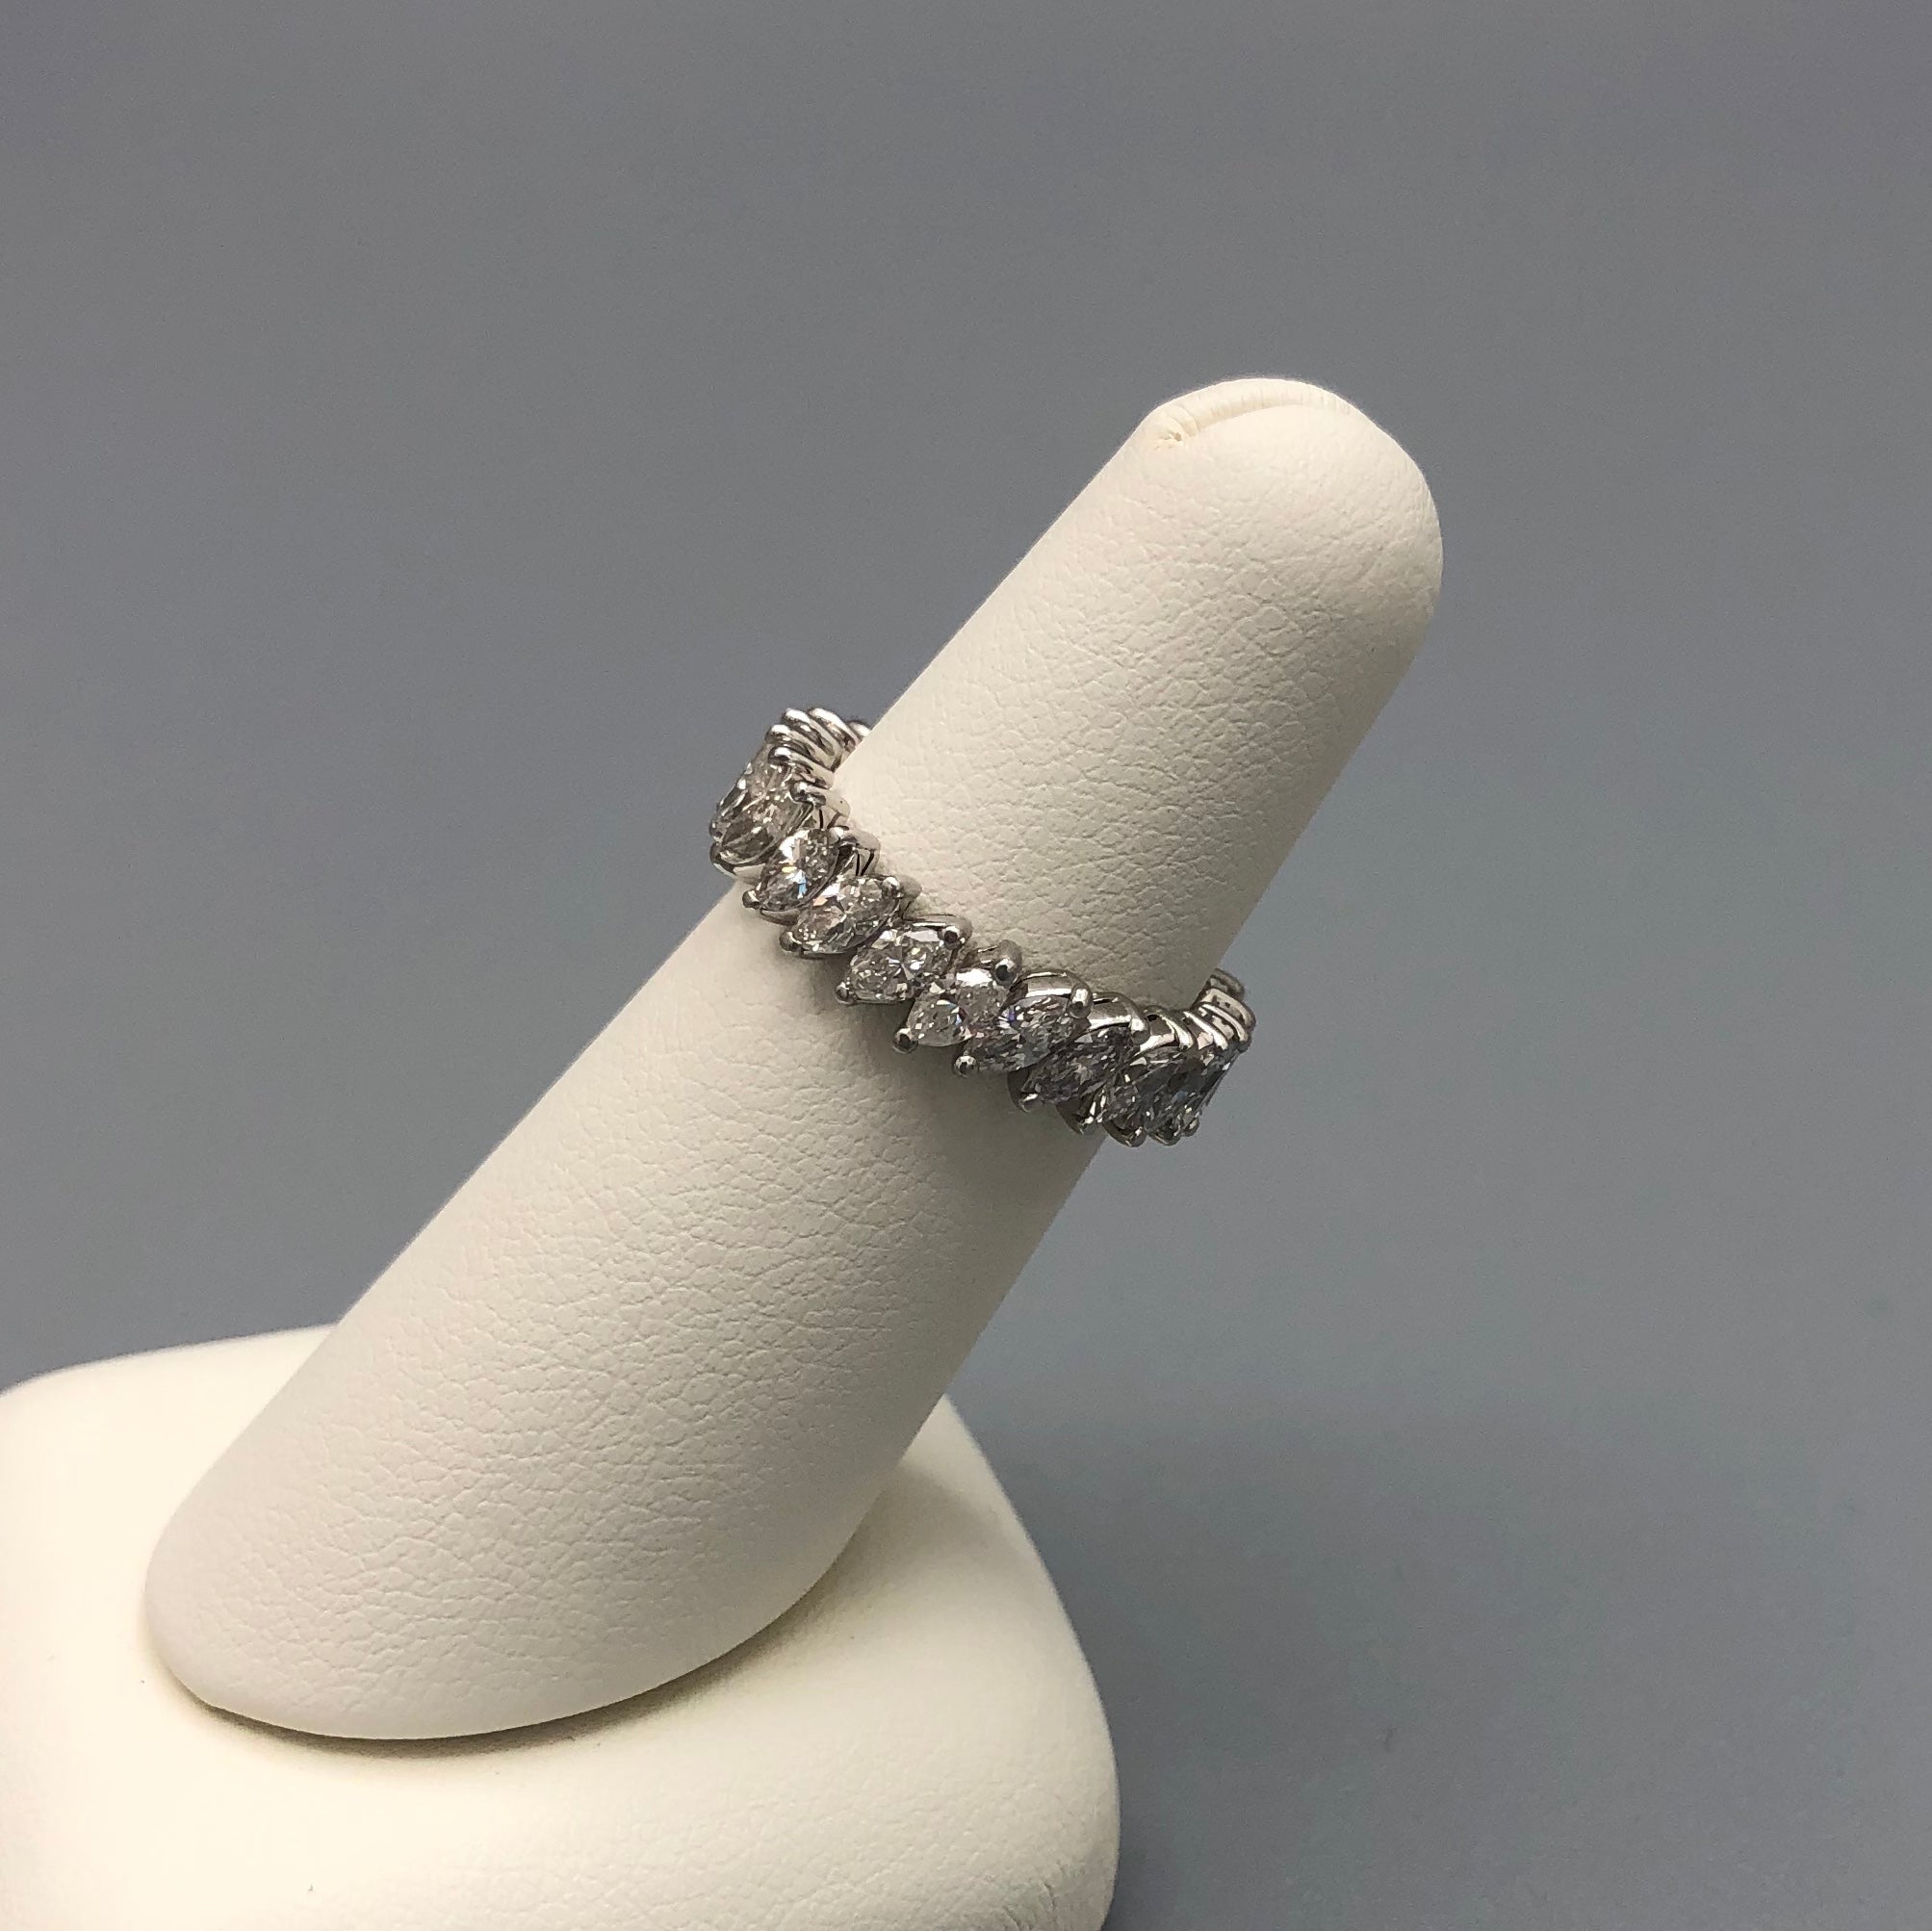 Marquise Cut Diamond Eternity Band with 24 diamonds set in 18k white gold